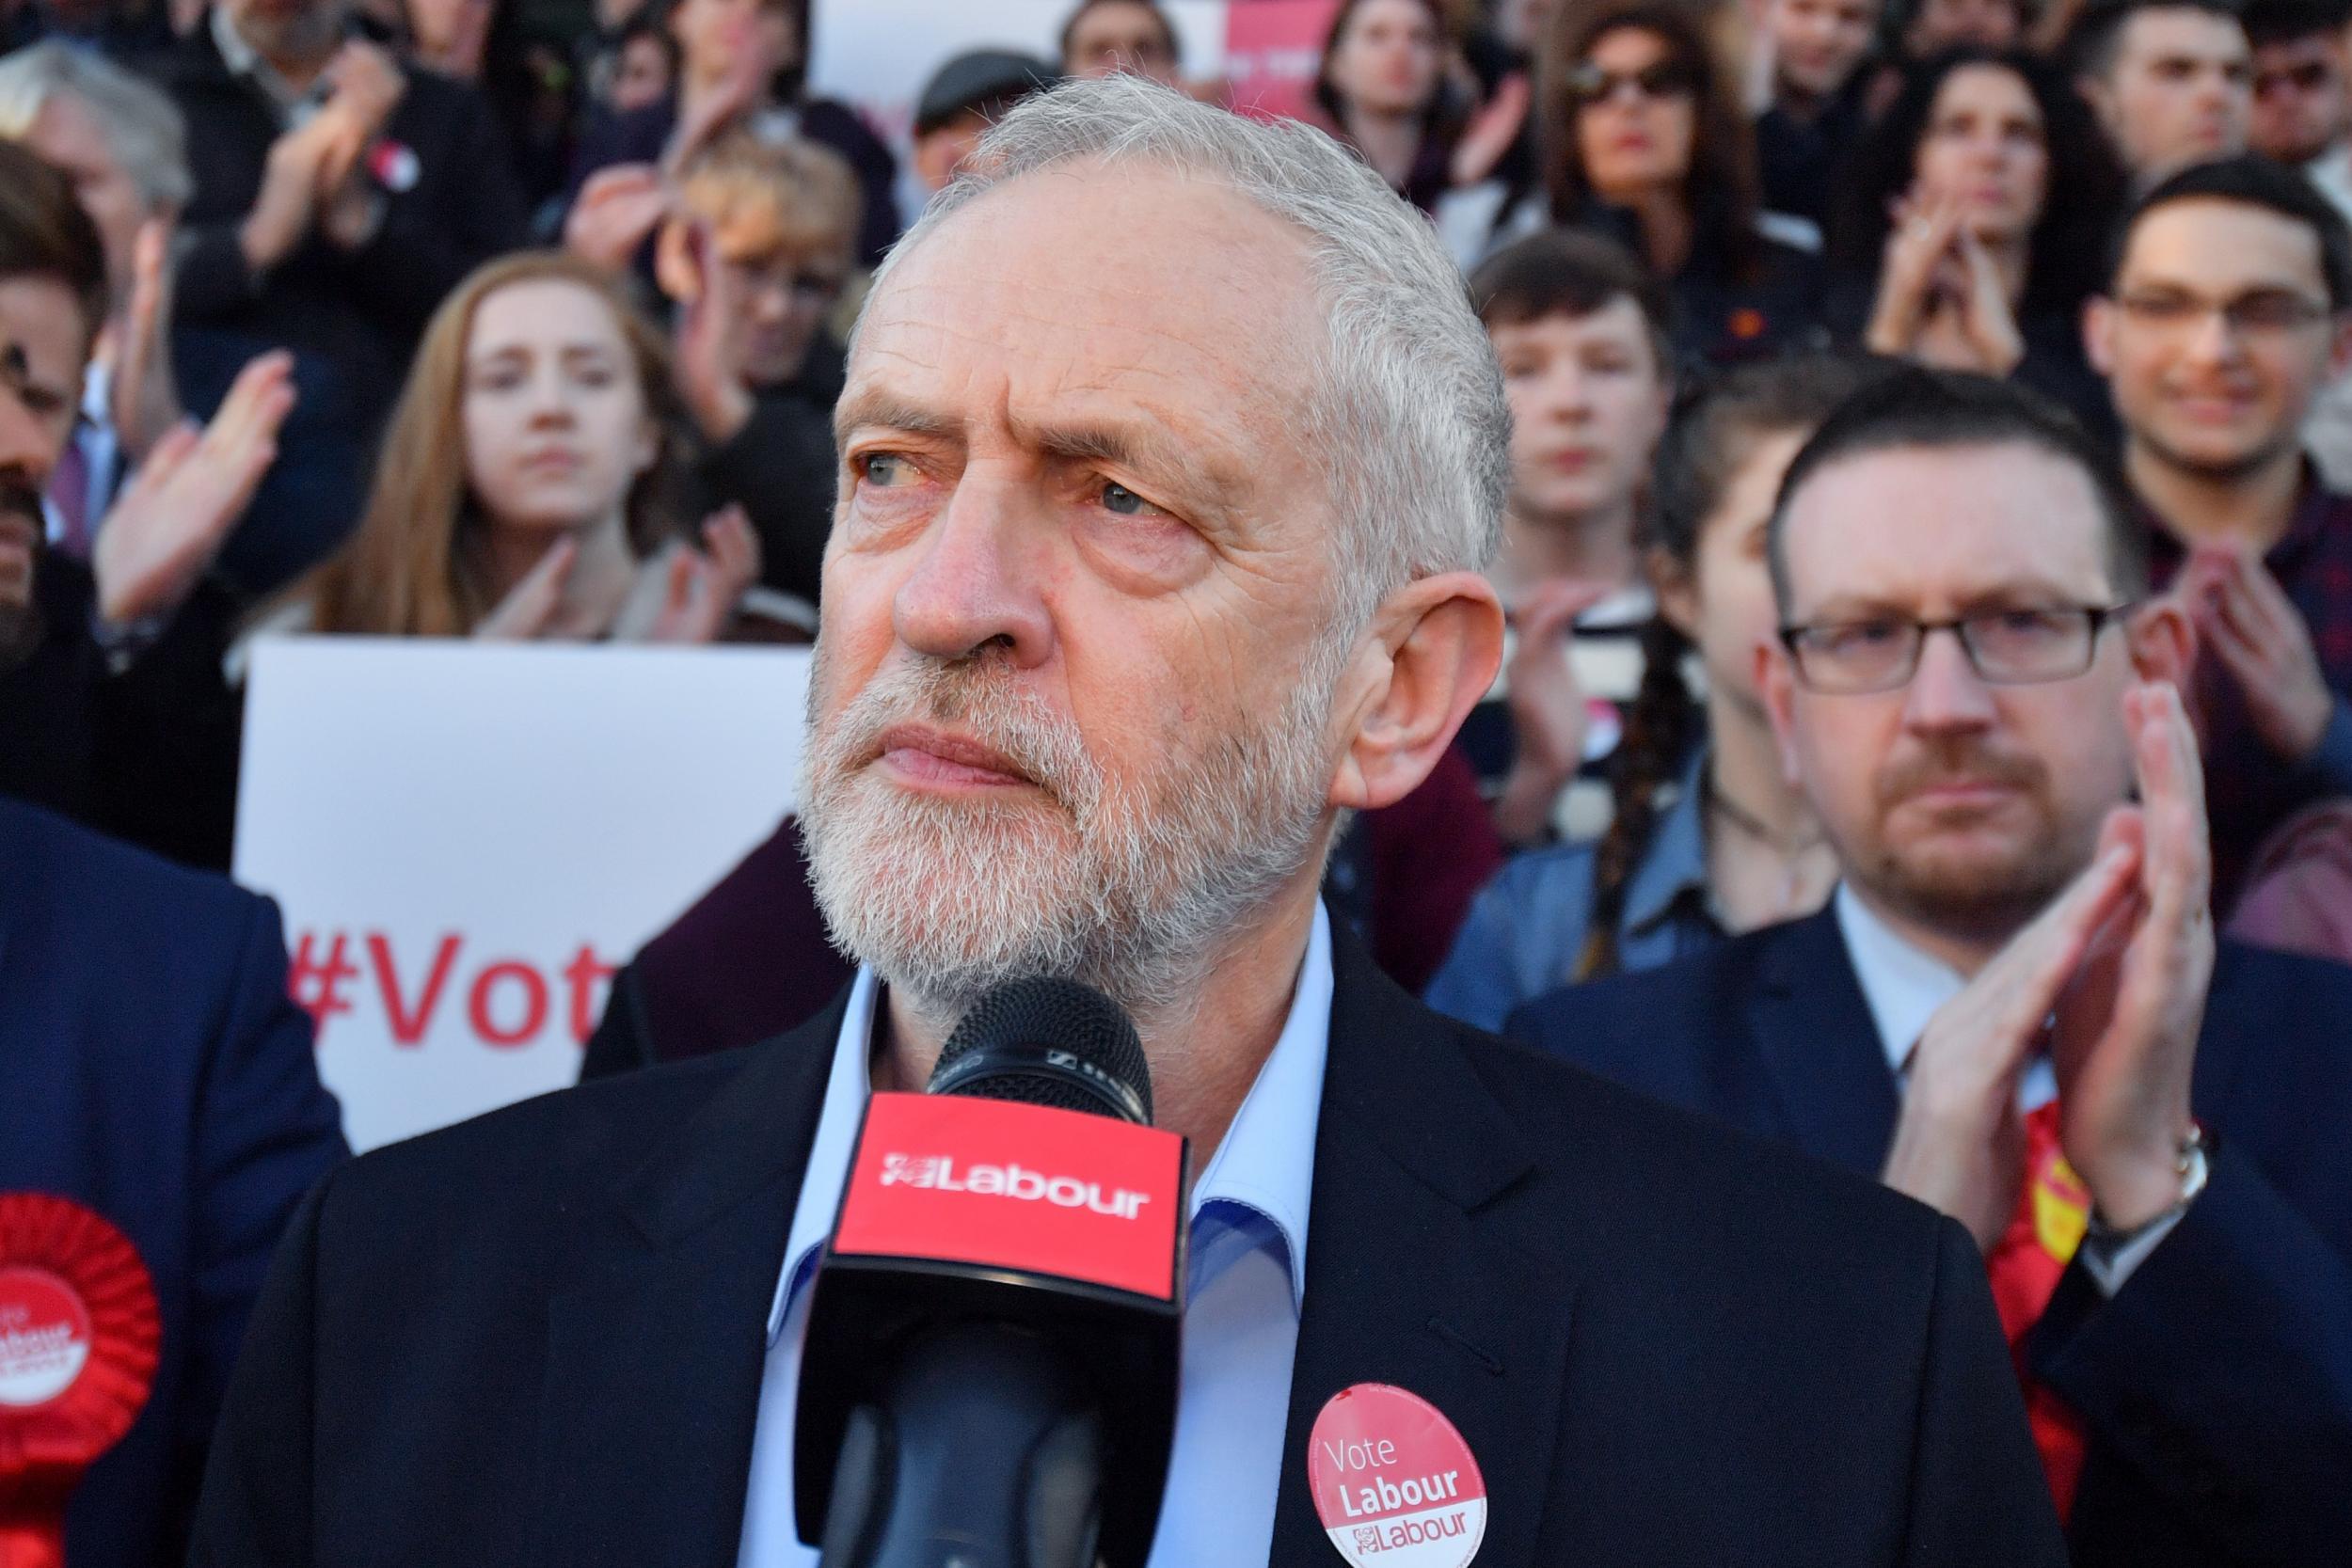 Momentum focuses heavily on social media campaigning to boost support for Mr Corbyn